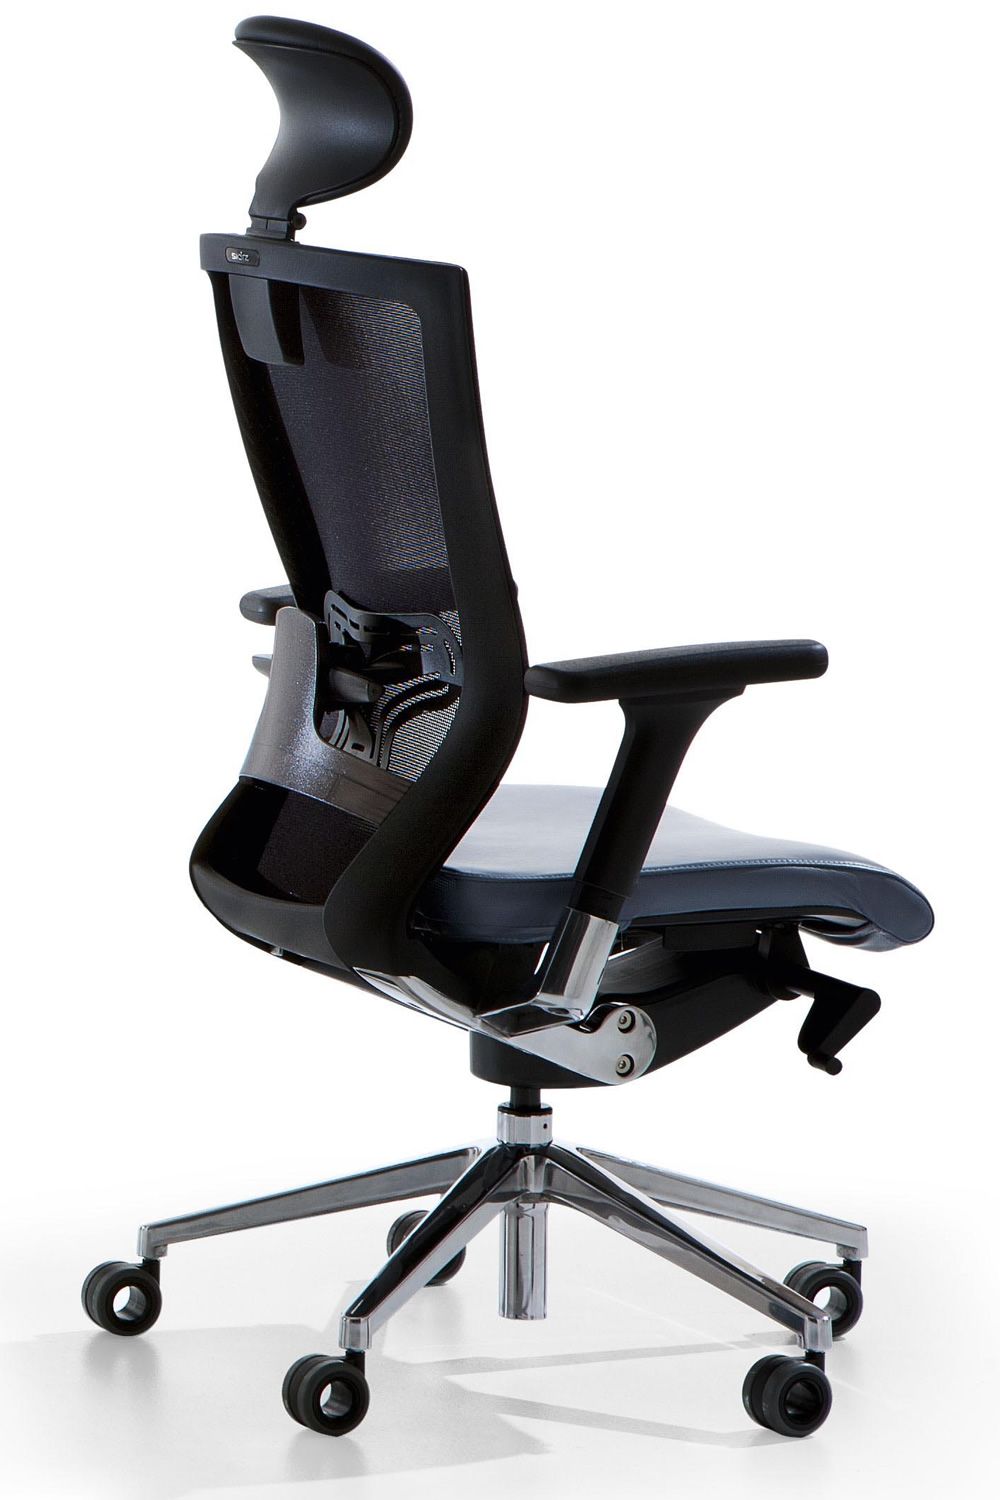 X-Chair - Office executive chair, with or without headrest, padded seat